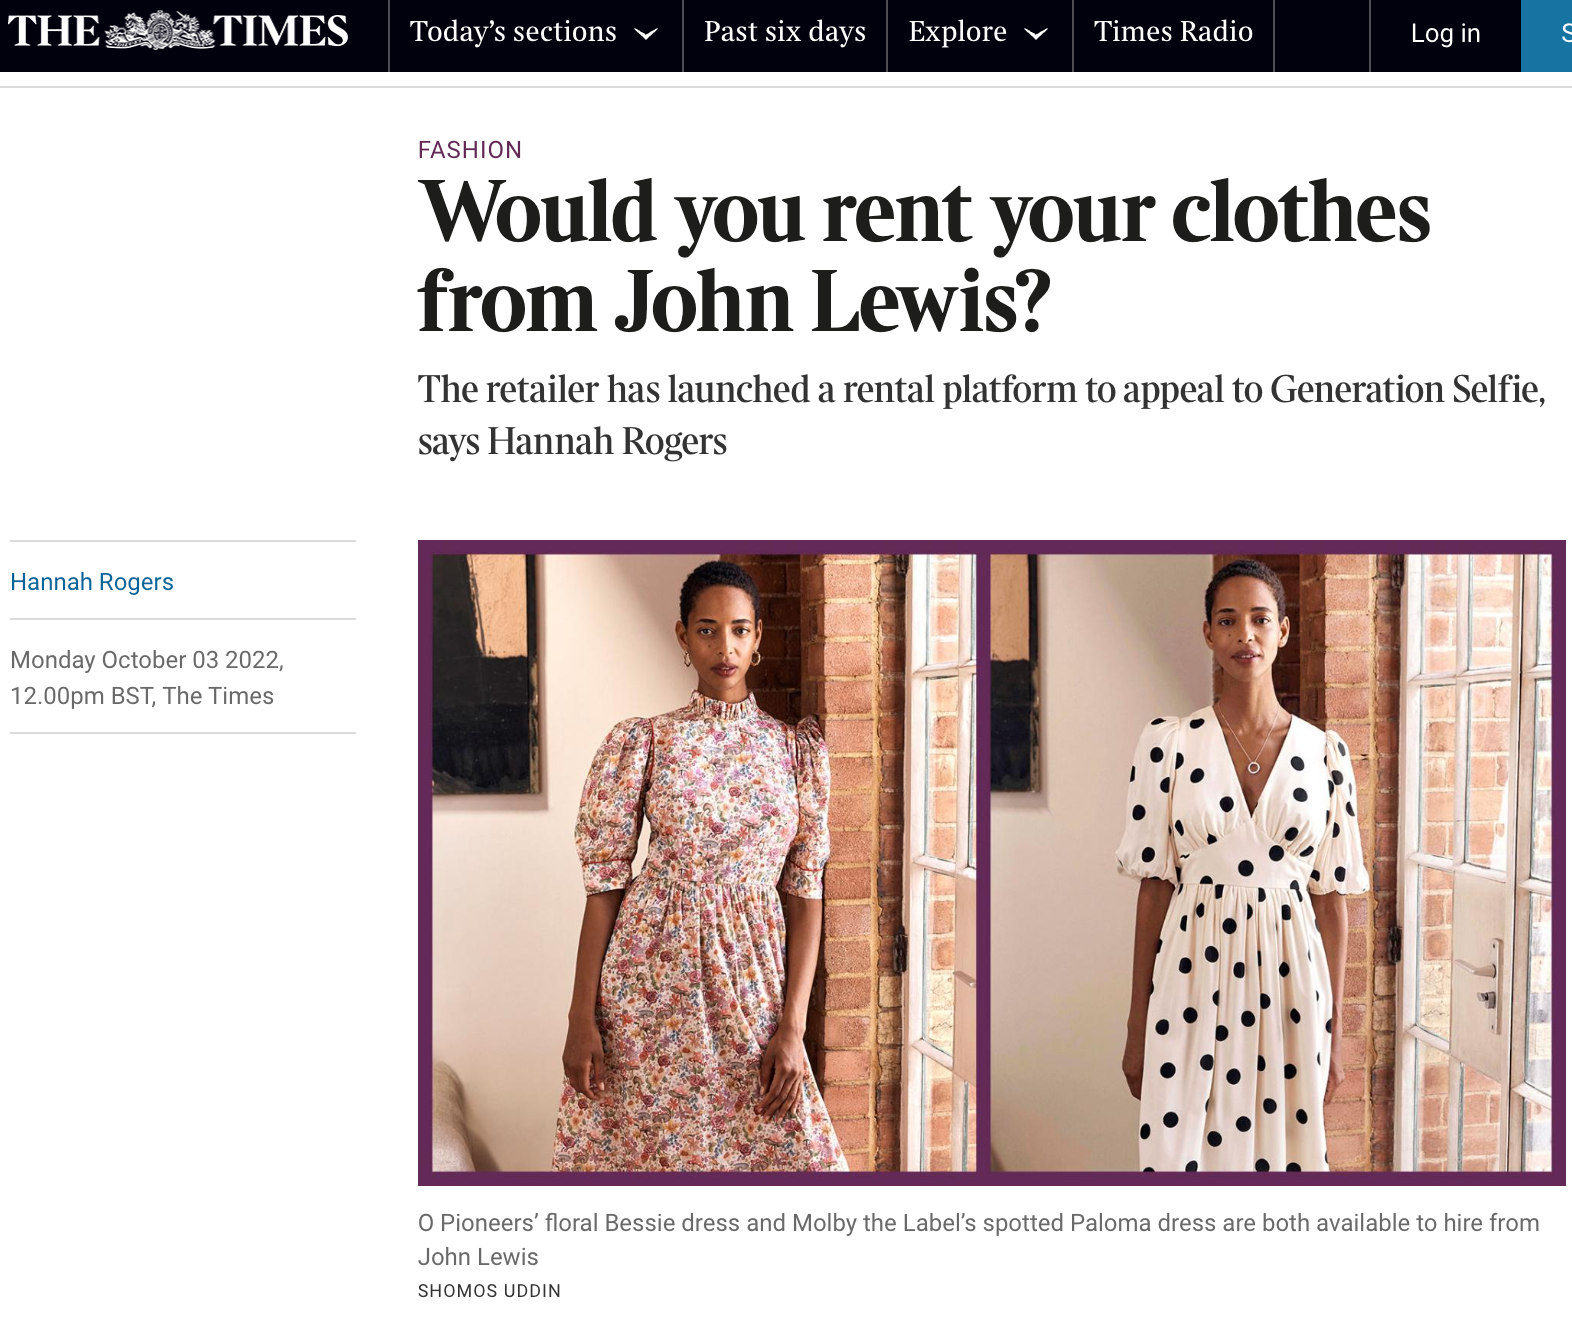 Would you rent your clothes from John Lewis?